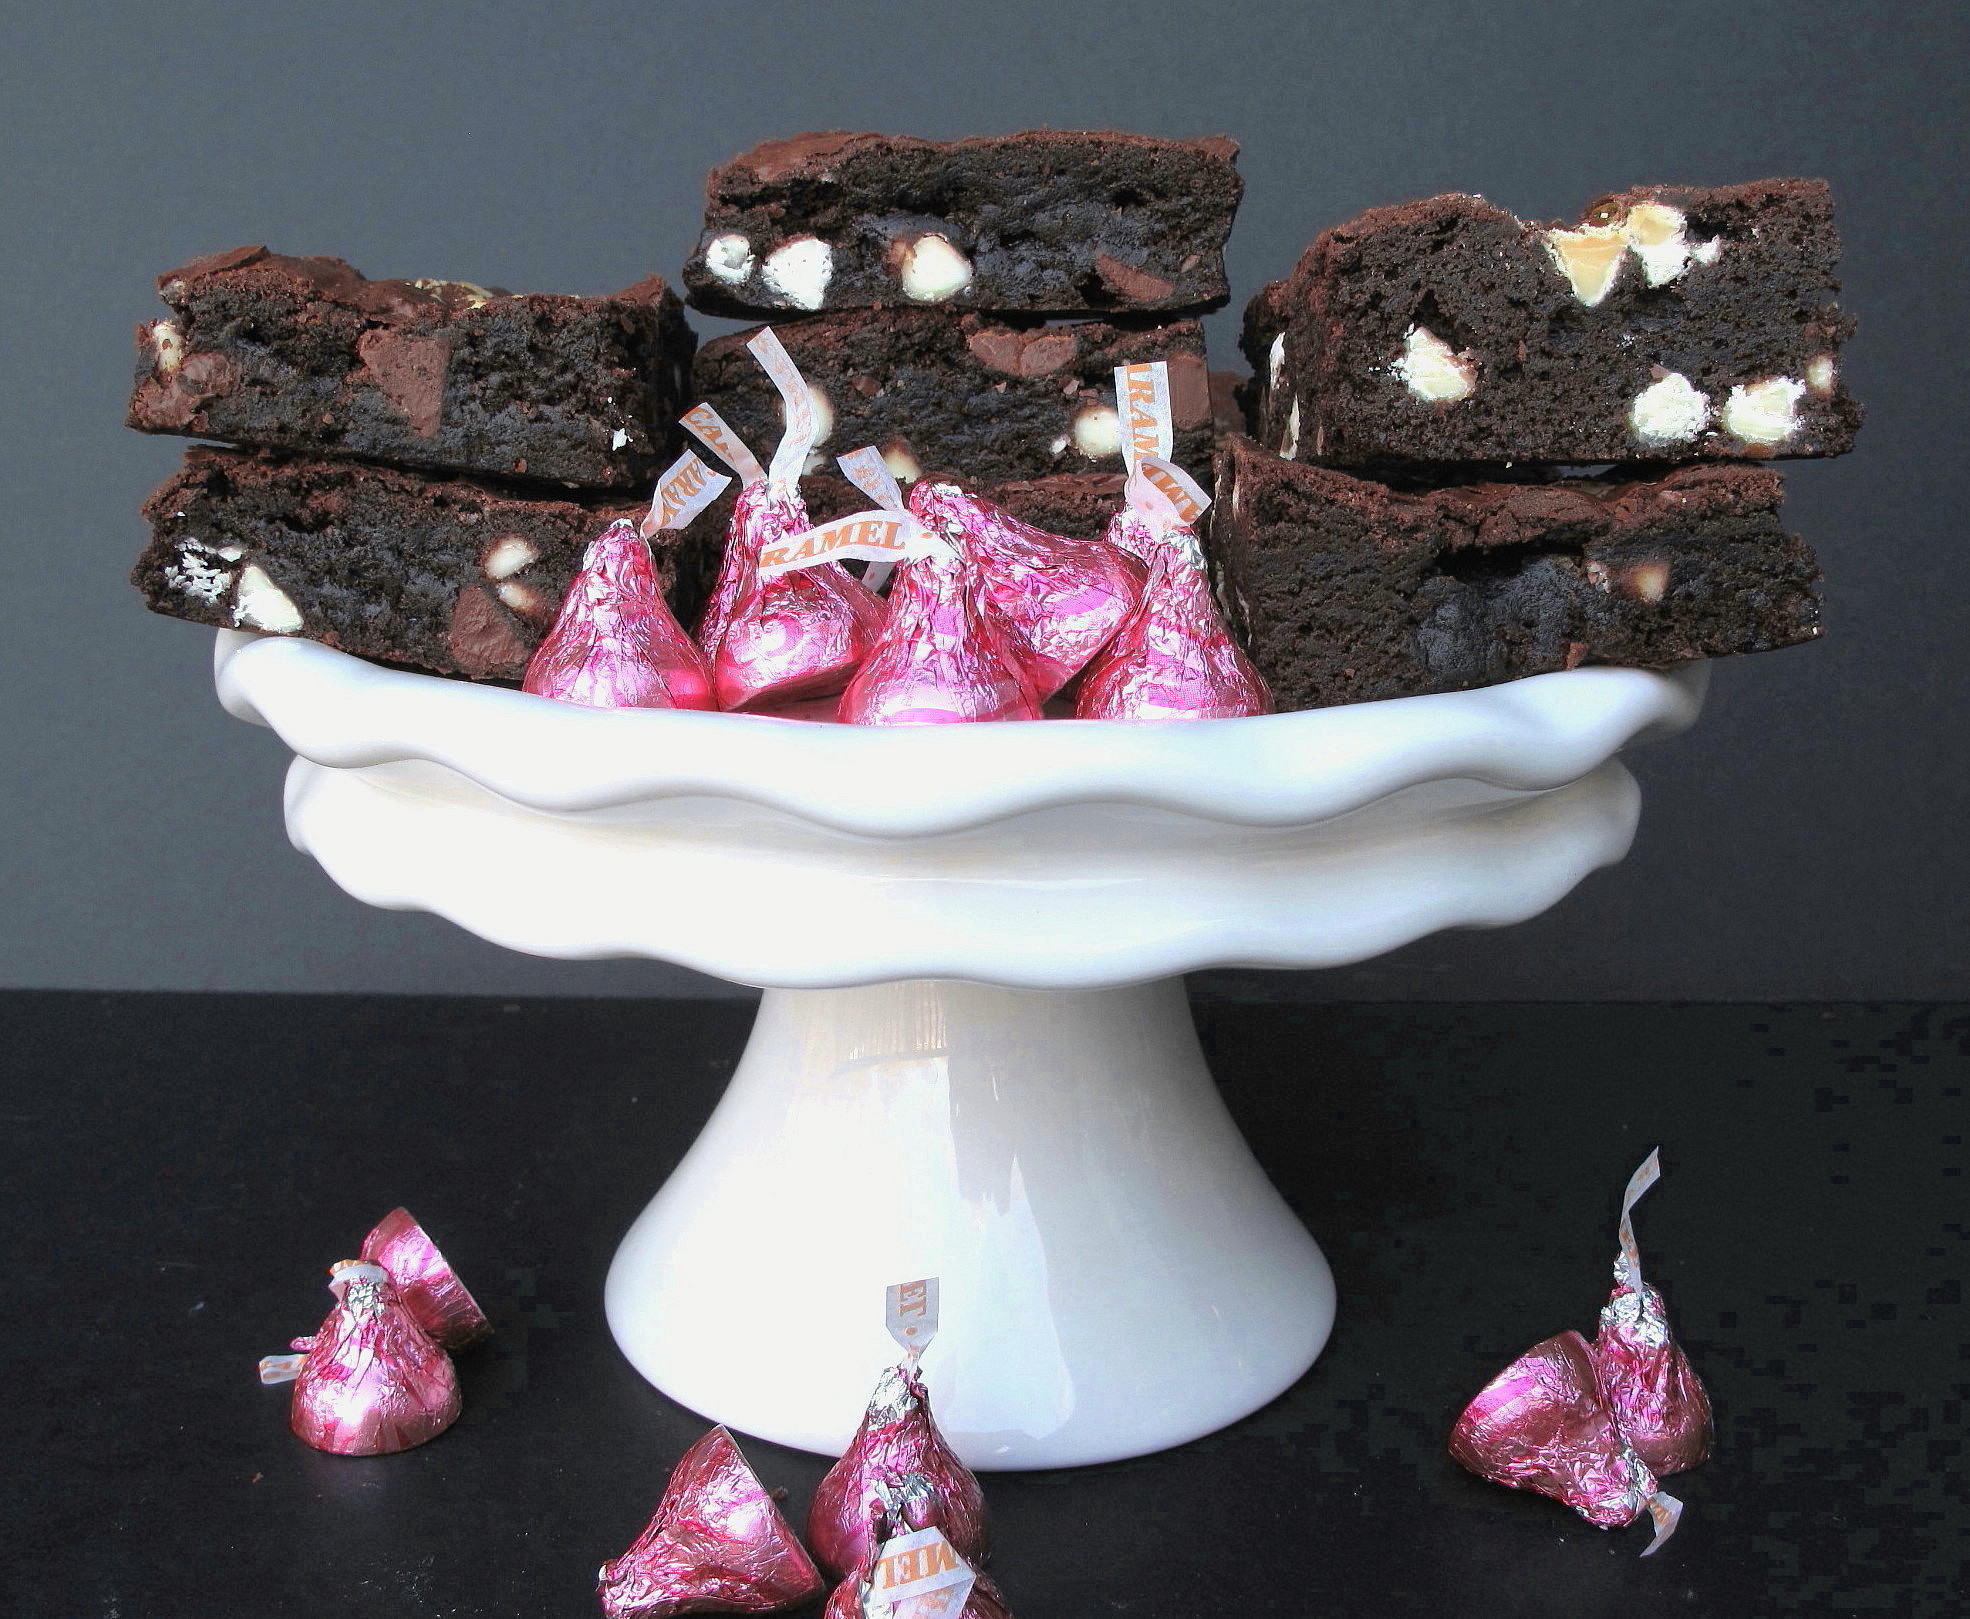  Brownies on a white cake stand.